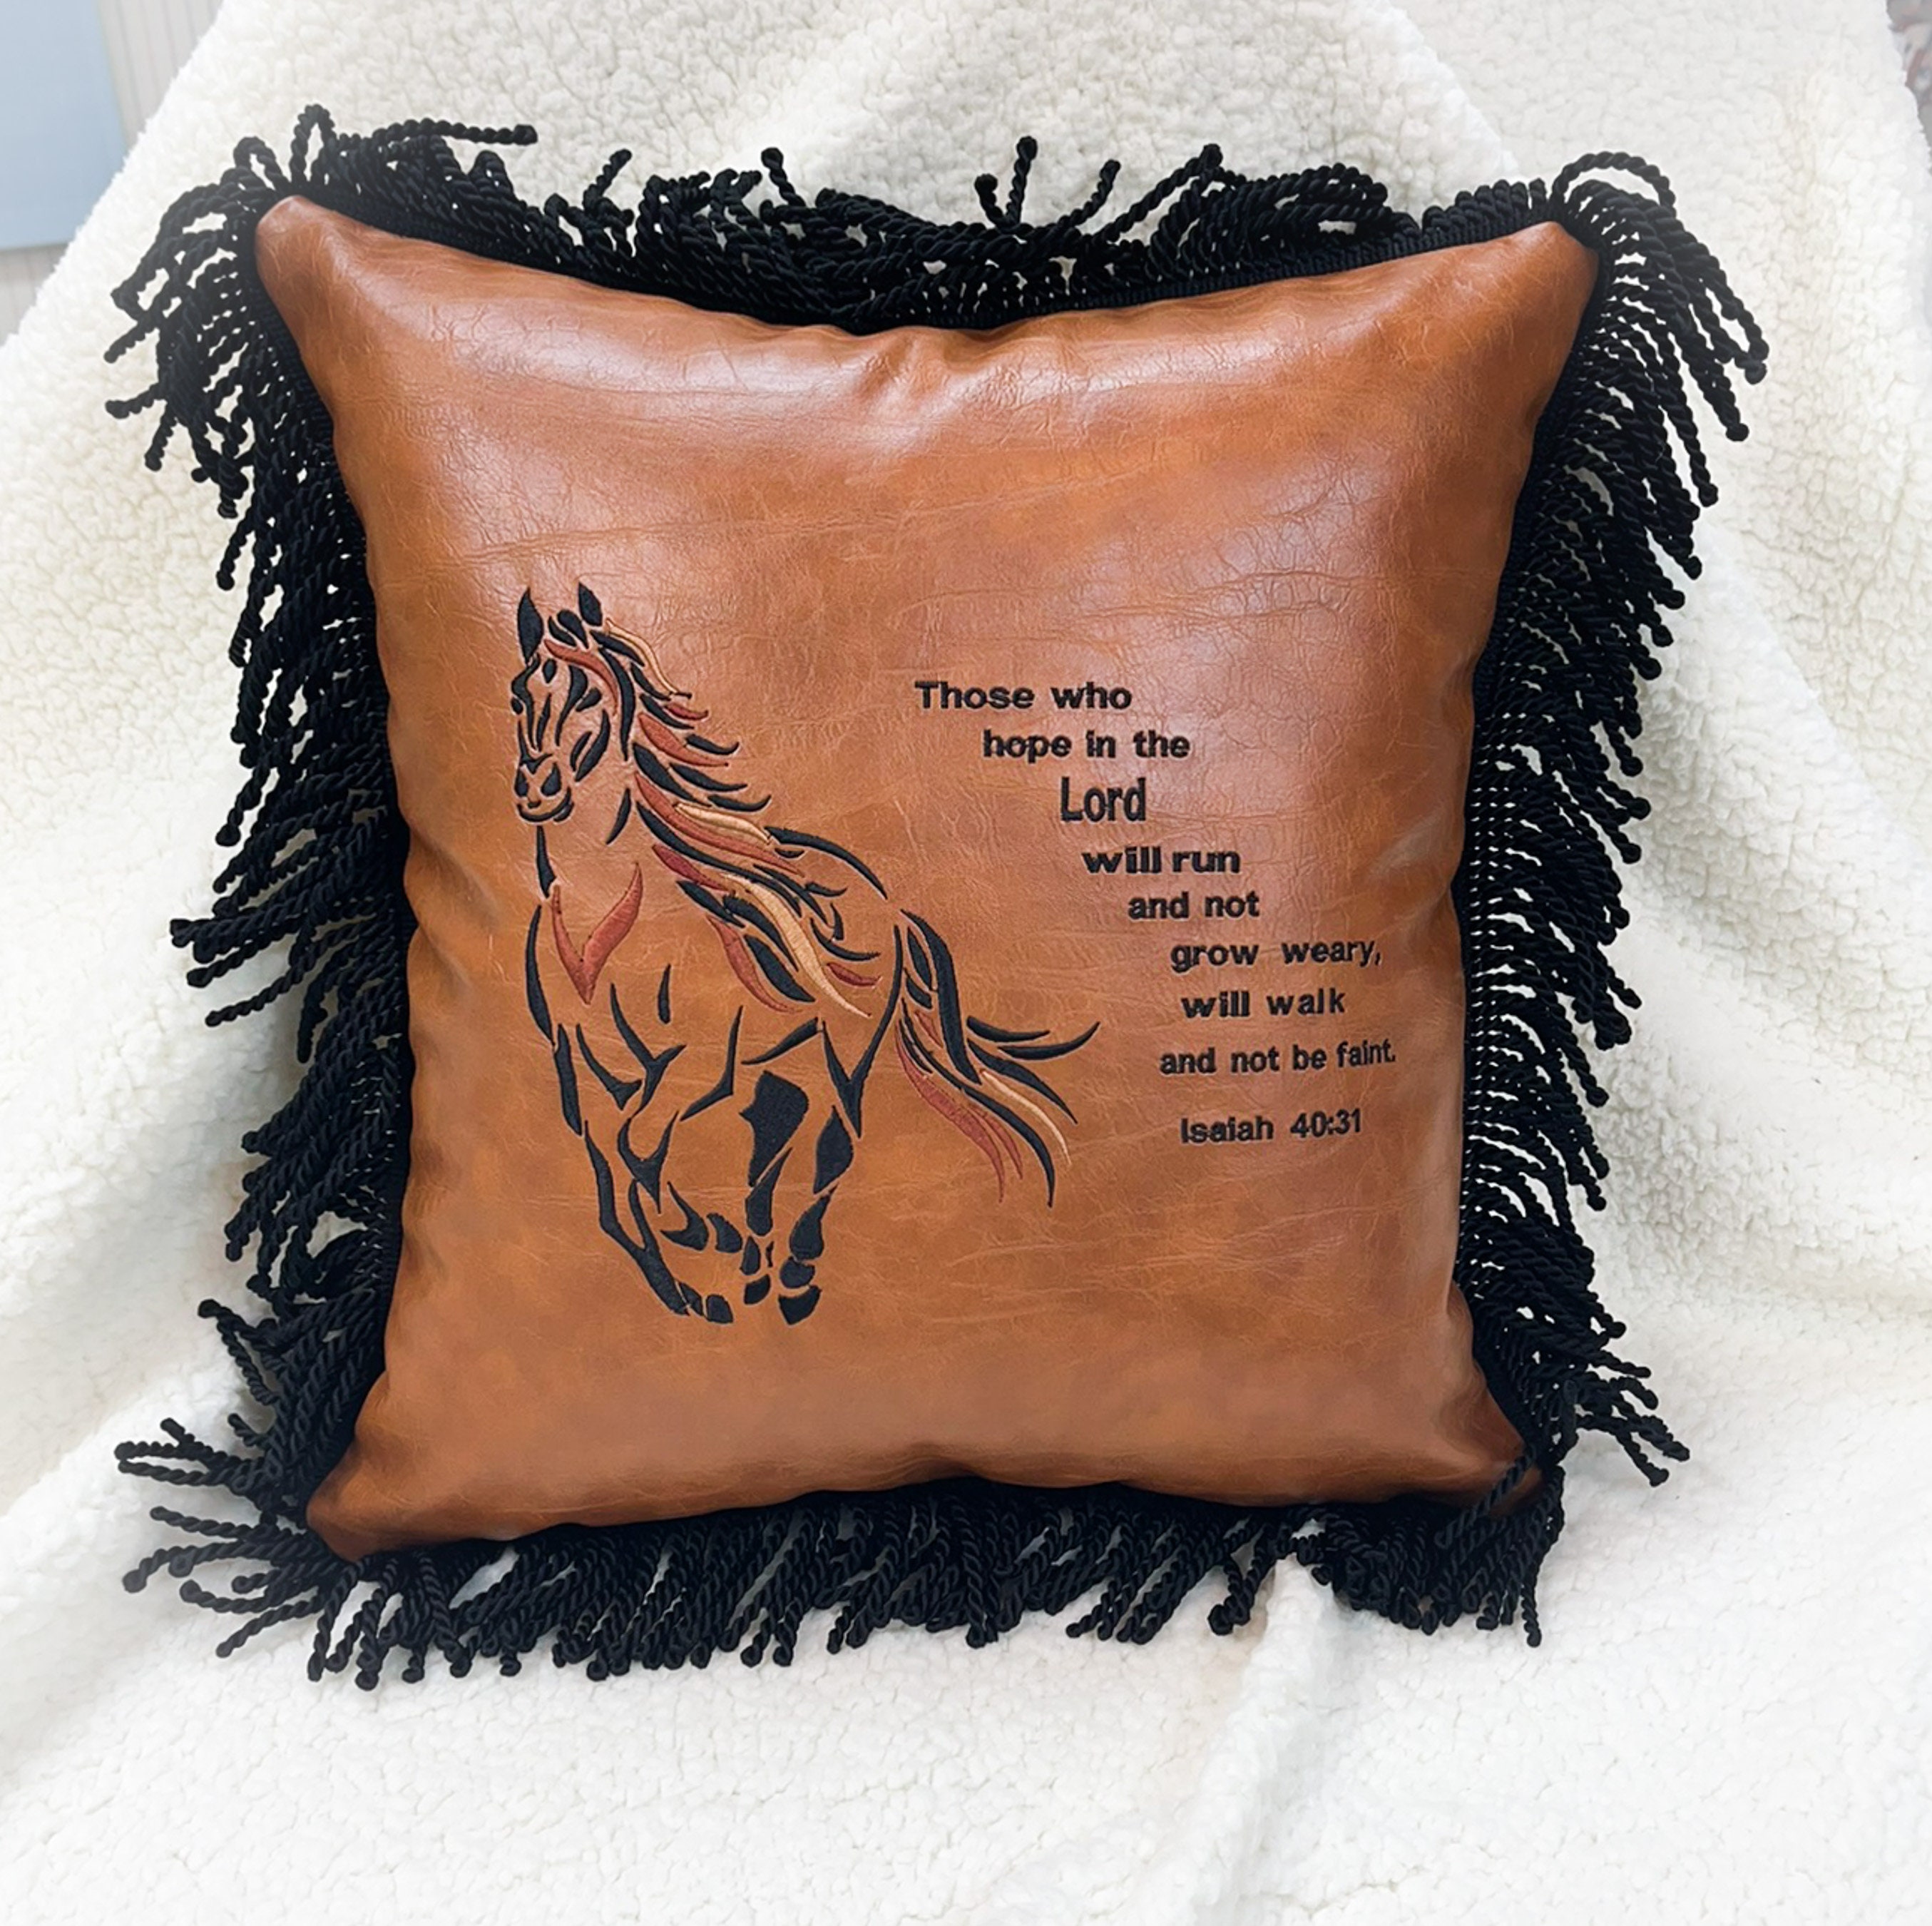 Surat Brown Embossed Leather Throw Pillow with Down-Alternative